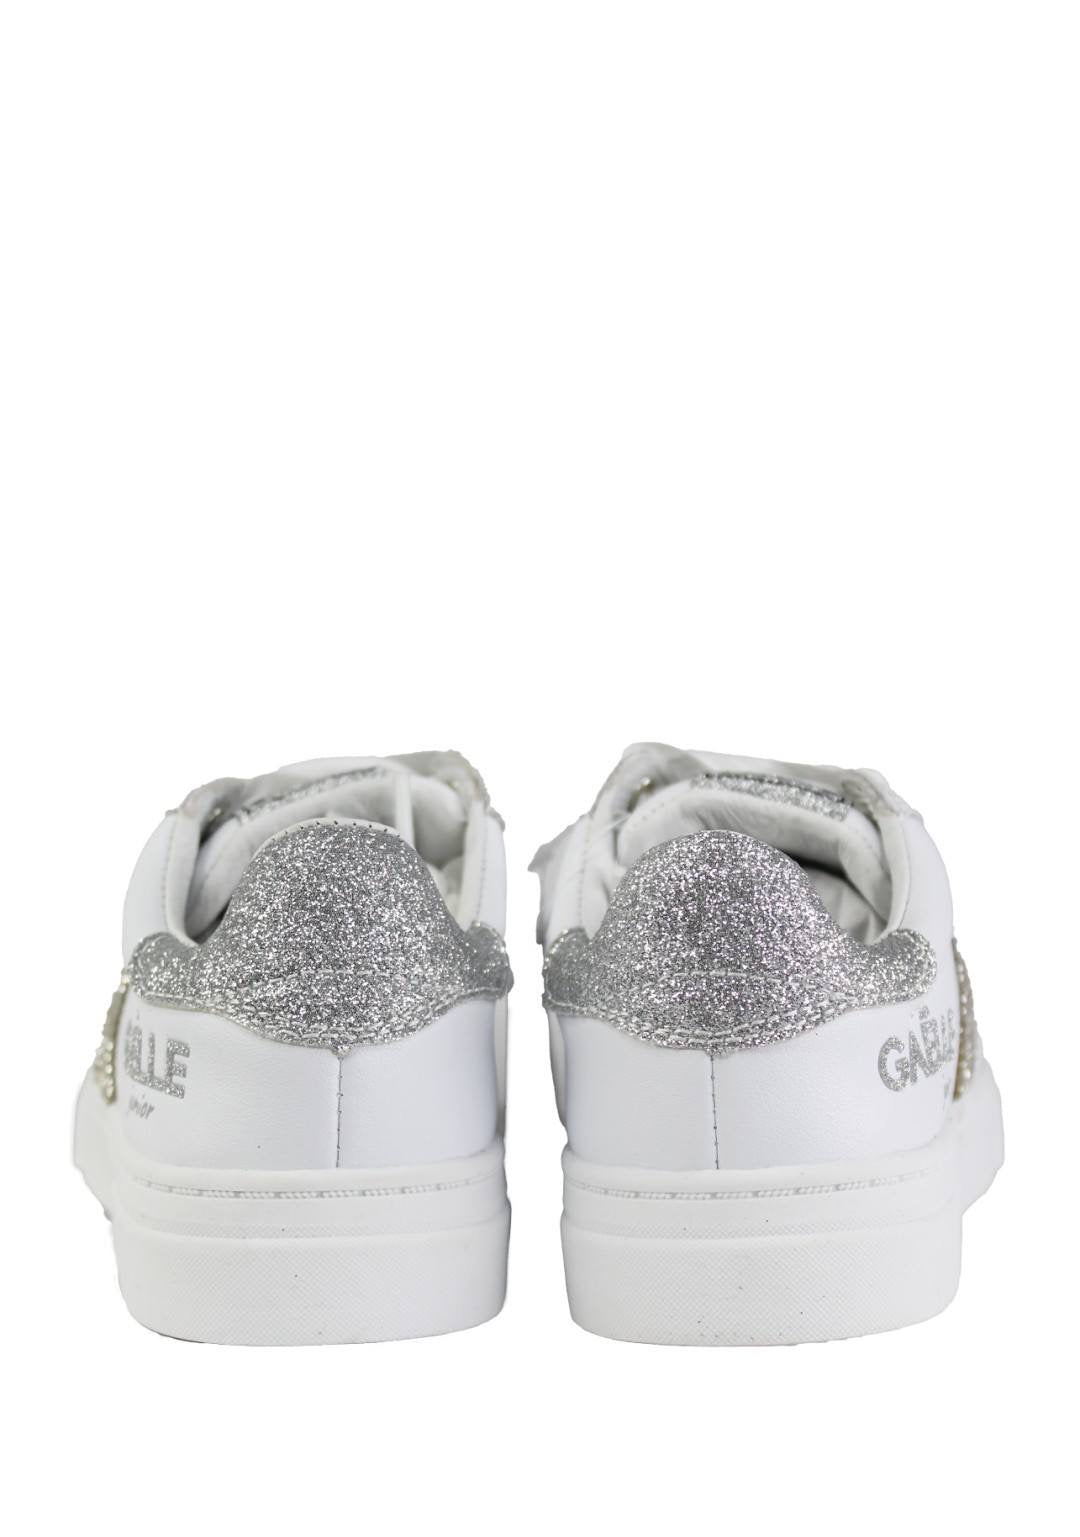 GAËLLE PARIS Junior Sneakers Bambina Candy. Bianco/Argento. GS0021L